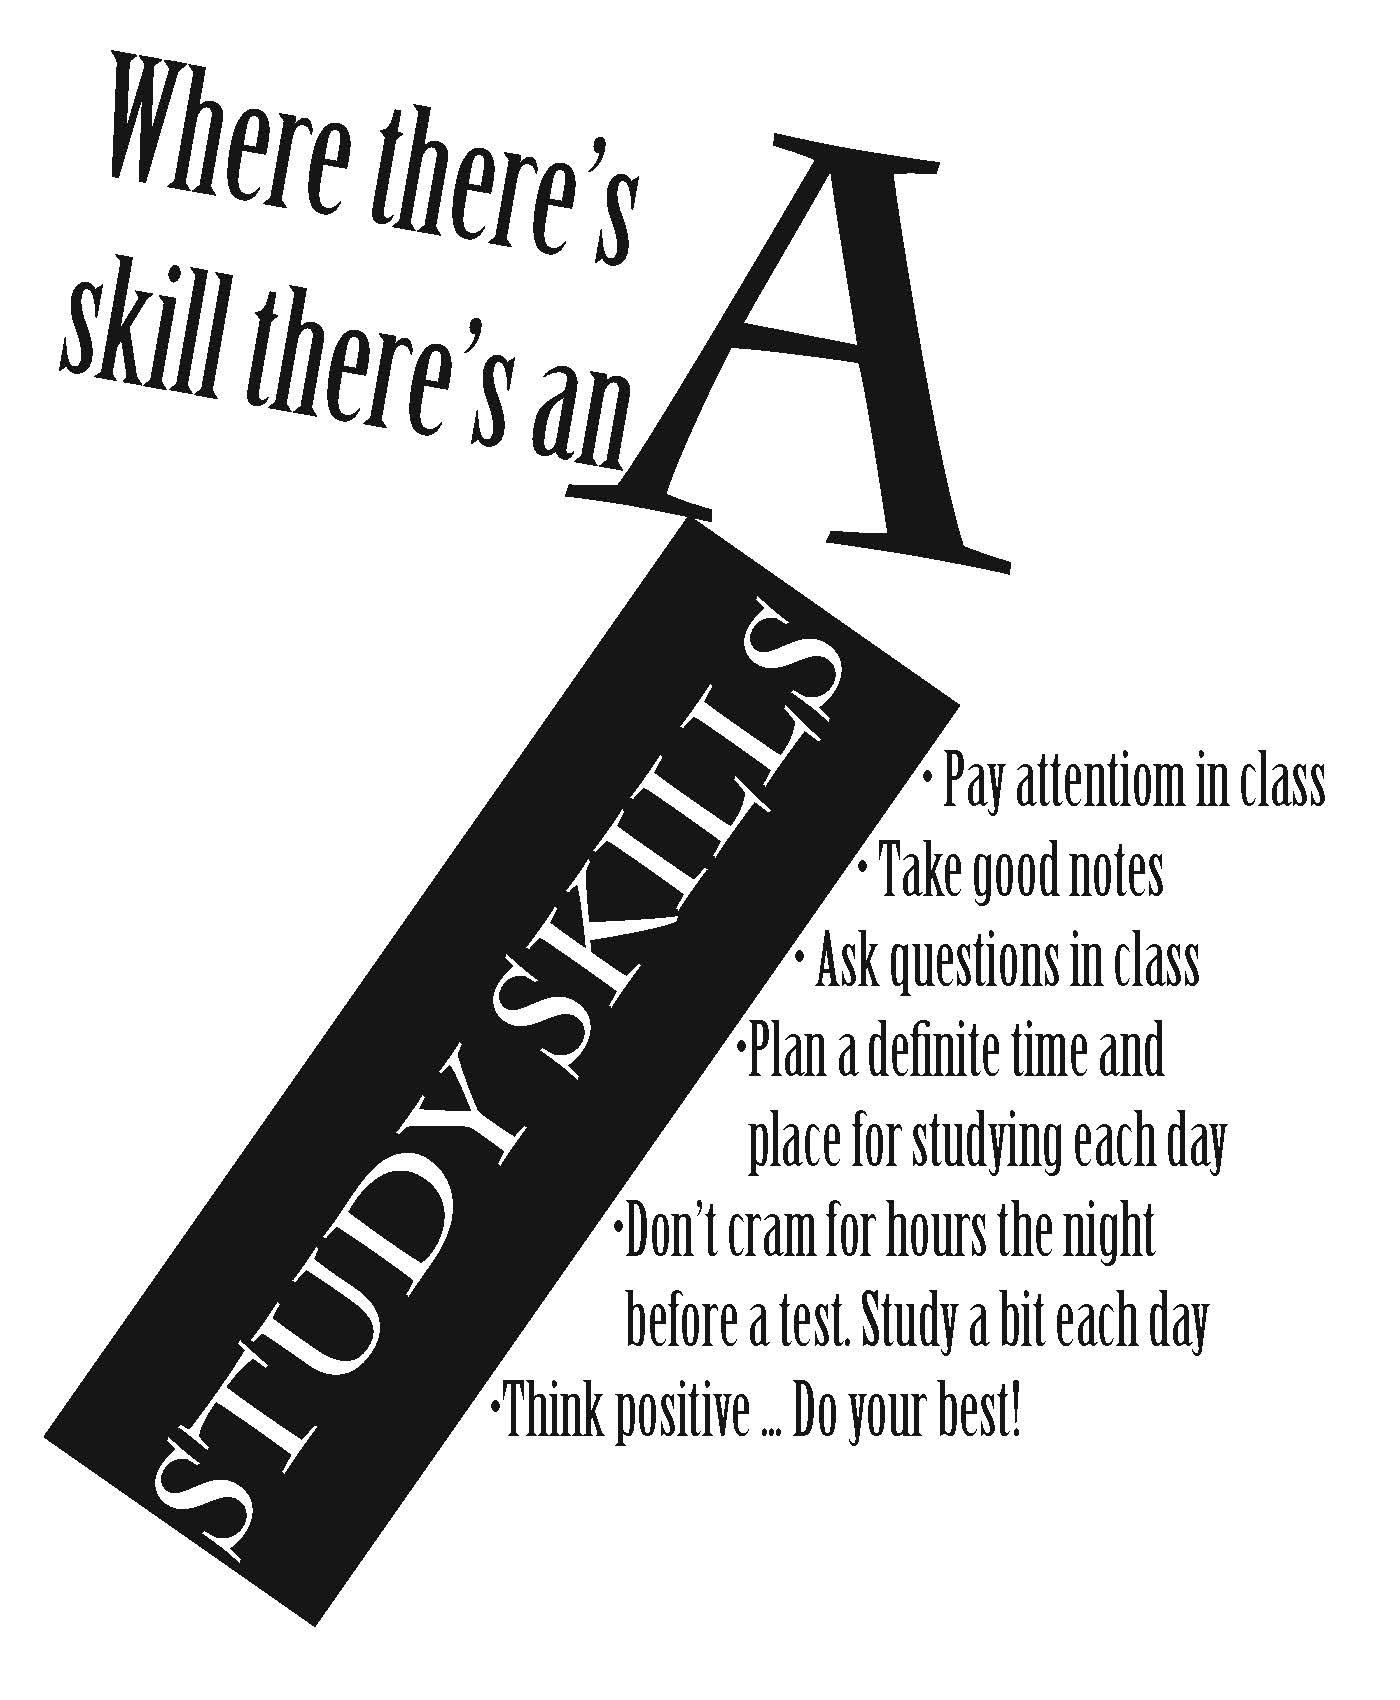 A poster promoting a list of study skills.